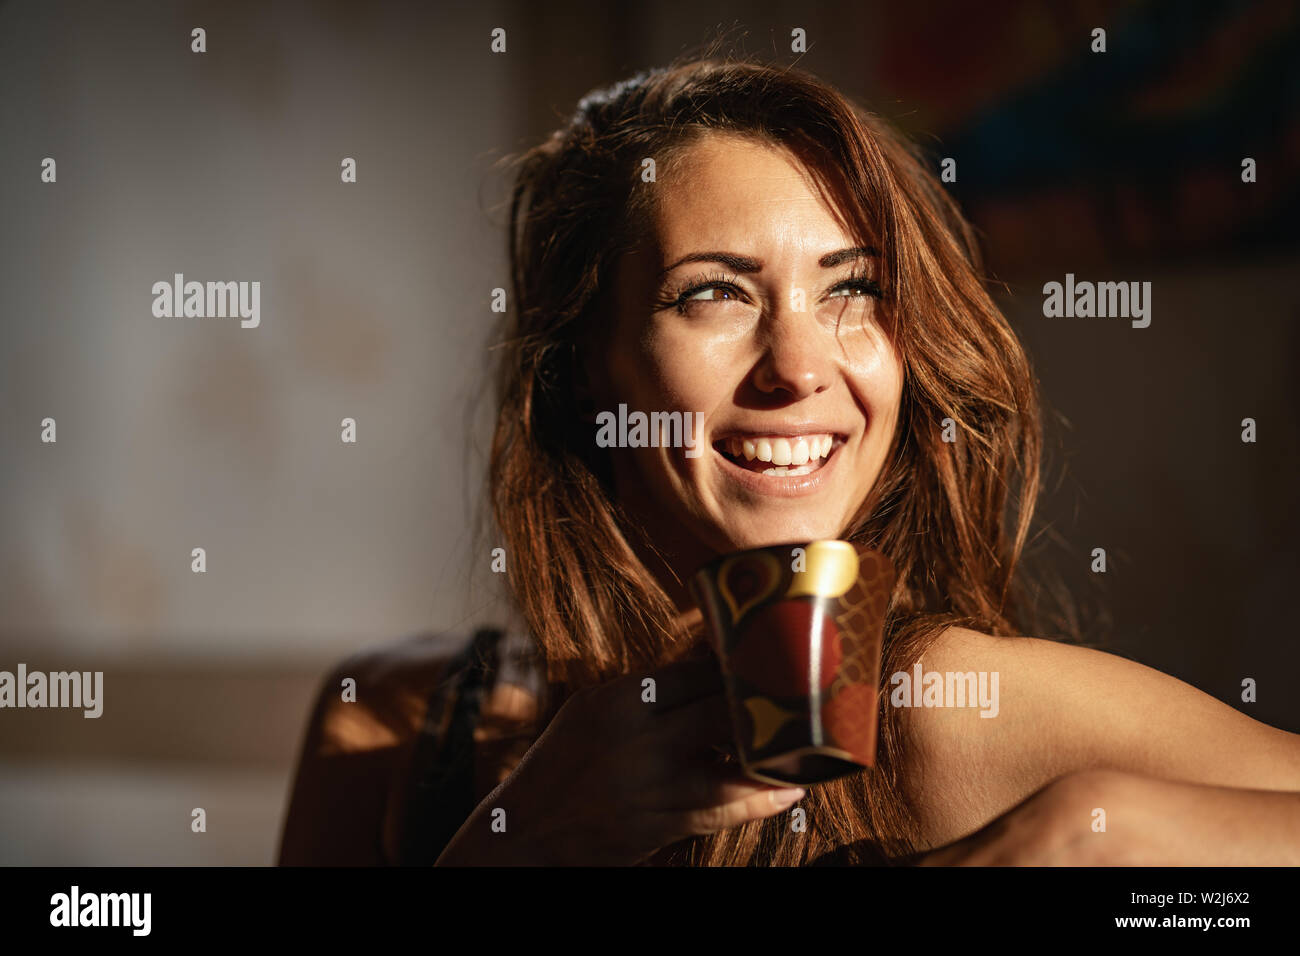 A young happy smiling woman drinks morning coffee in the room after awakening. Stock Photo